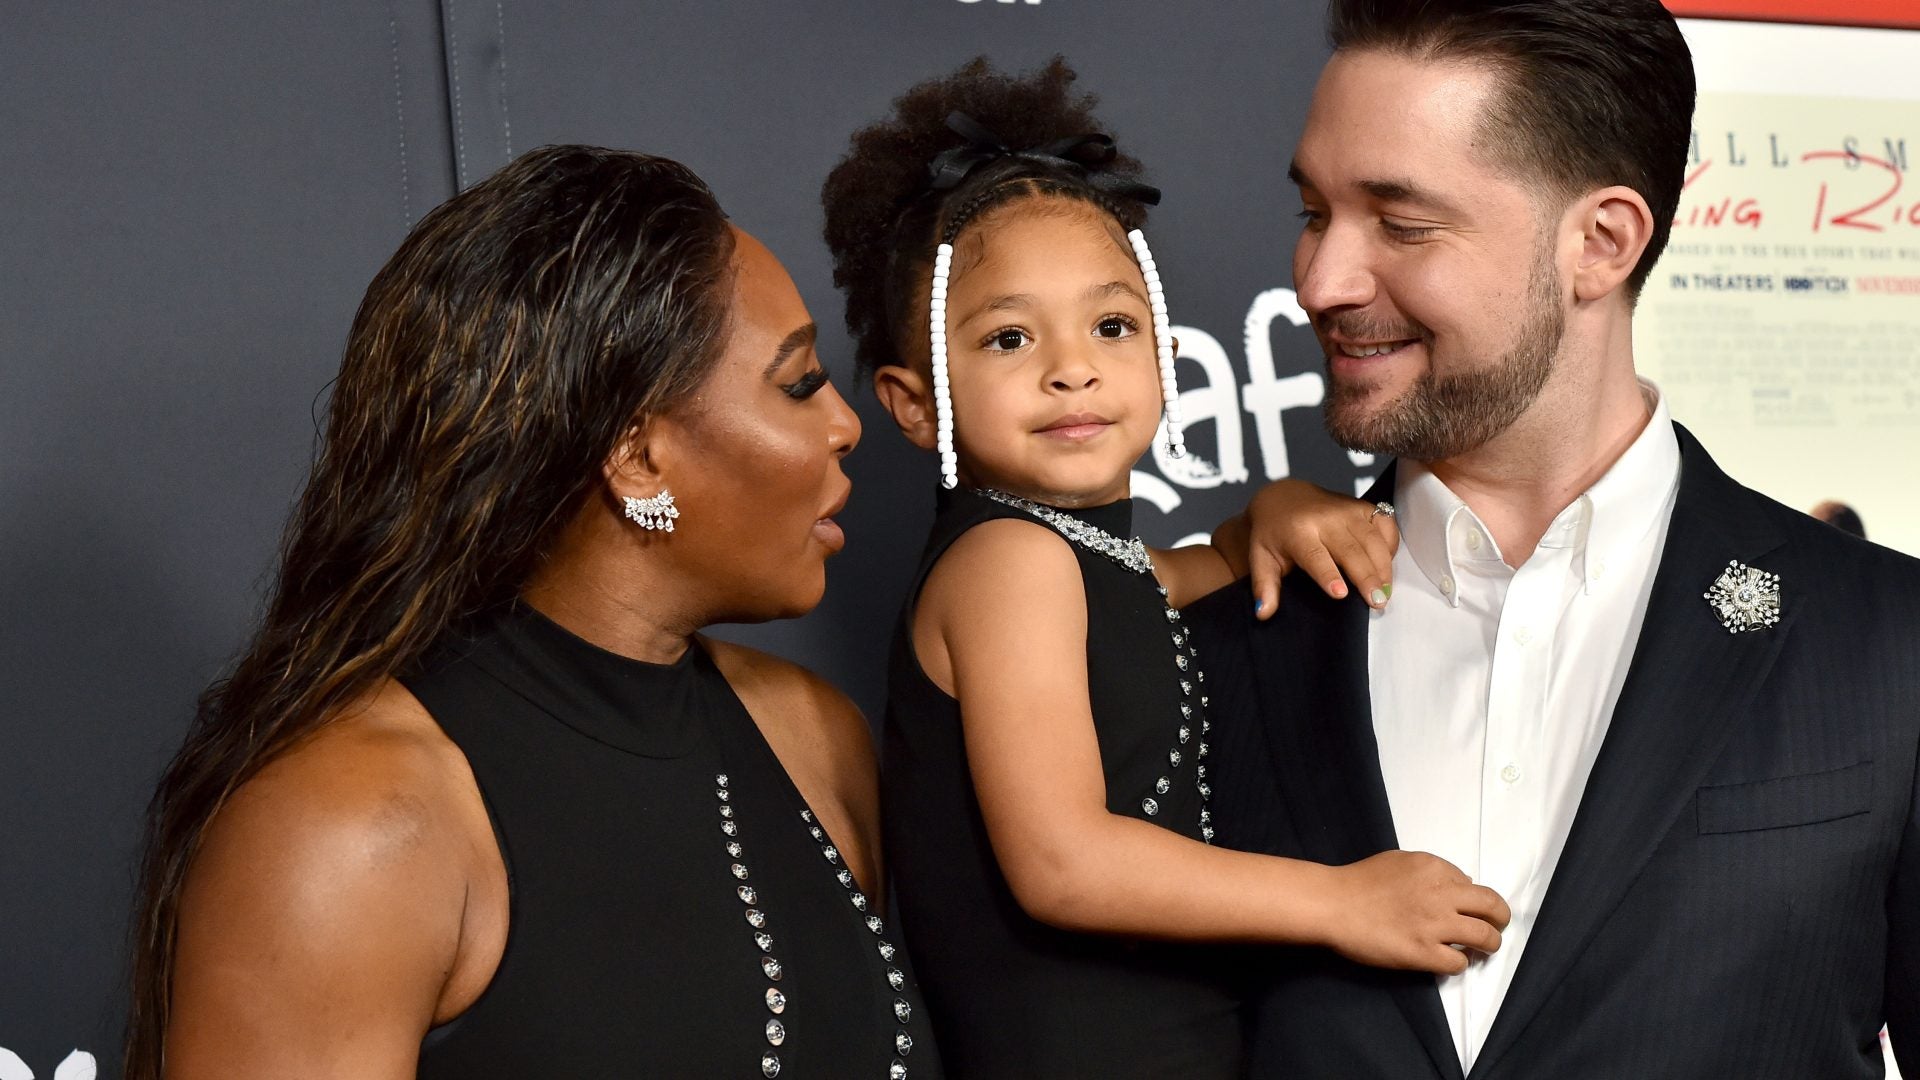 'Are You Kidding Me?': Serena Williams' Daughter Had The Best Reaction To Finding Out Her Mom Is Pregnant